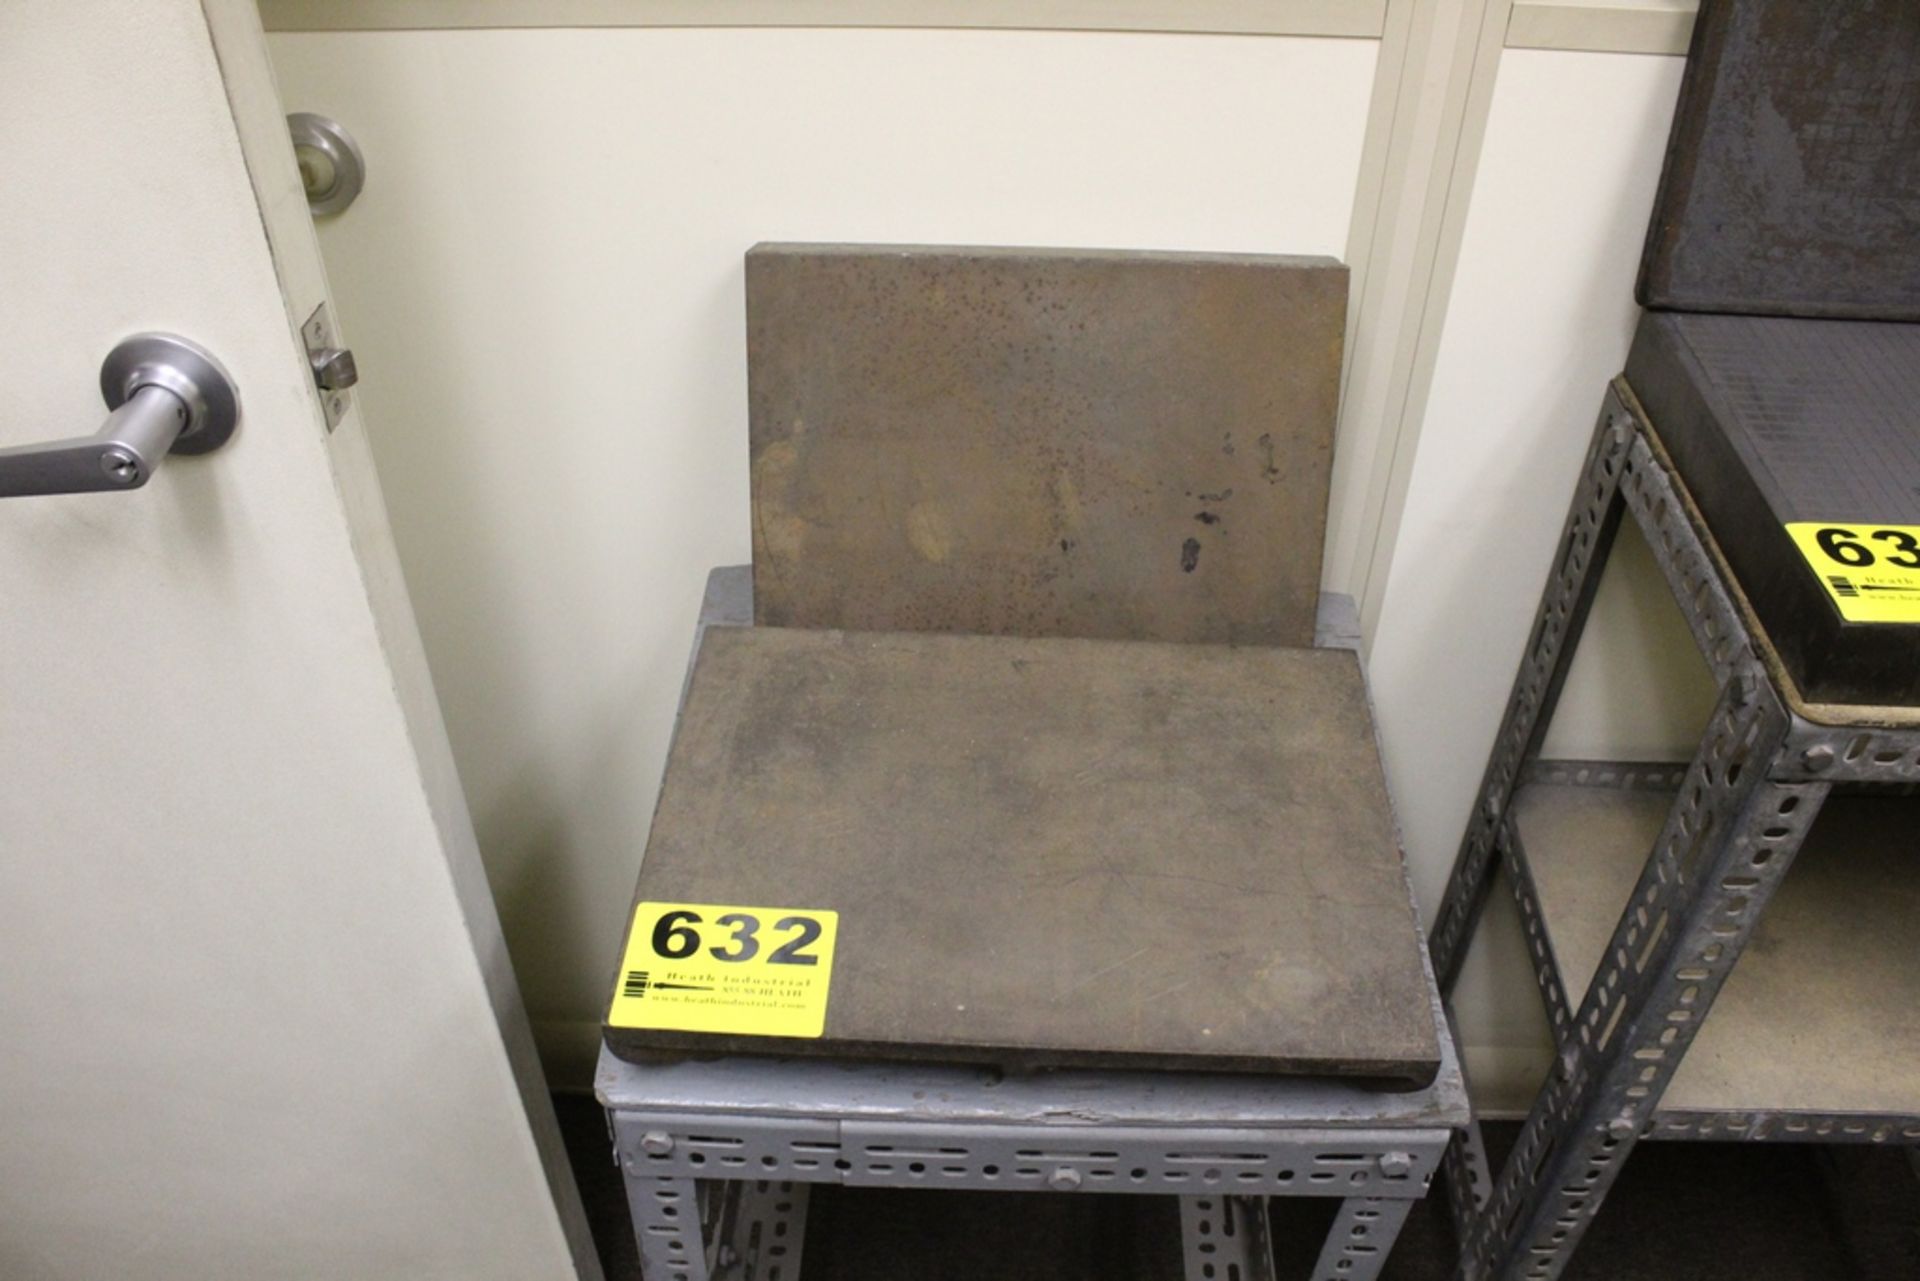 (2) STEEL INSPECTION PLATES 15 1/2" X 12" X 2 1/2" AND 14" X 10" X 2"